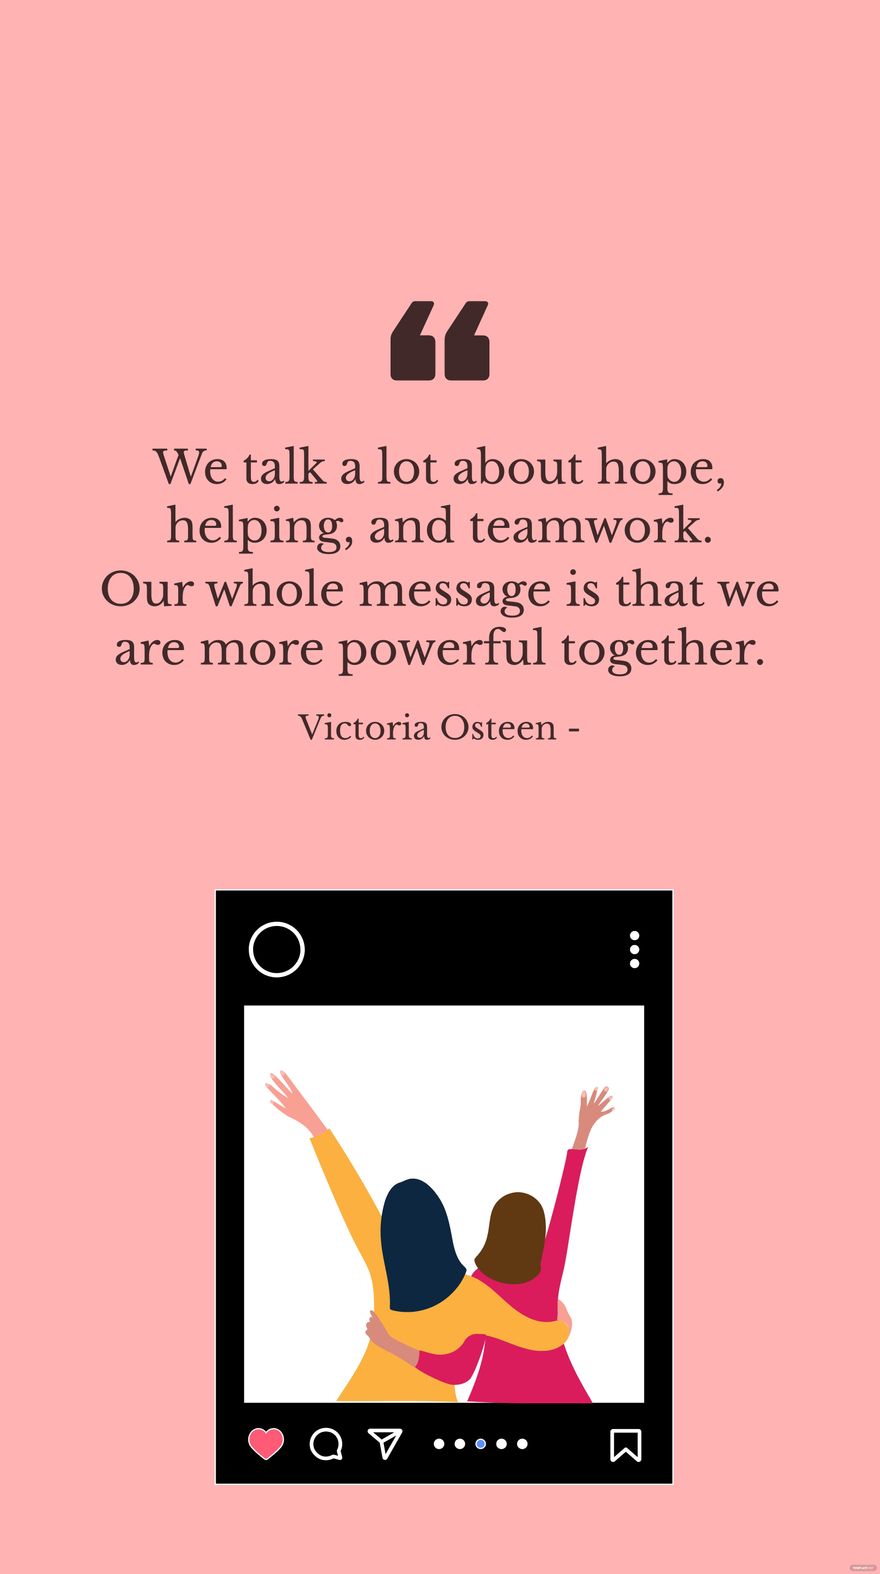 Free Victoria Osteen - We talk a lot about hope, helping, and teamwork. Our whole message is that we are more powerful together. in JPG